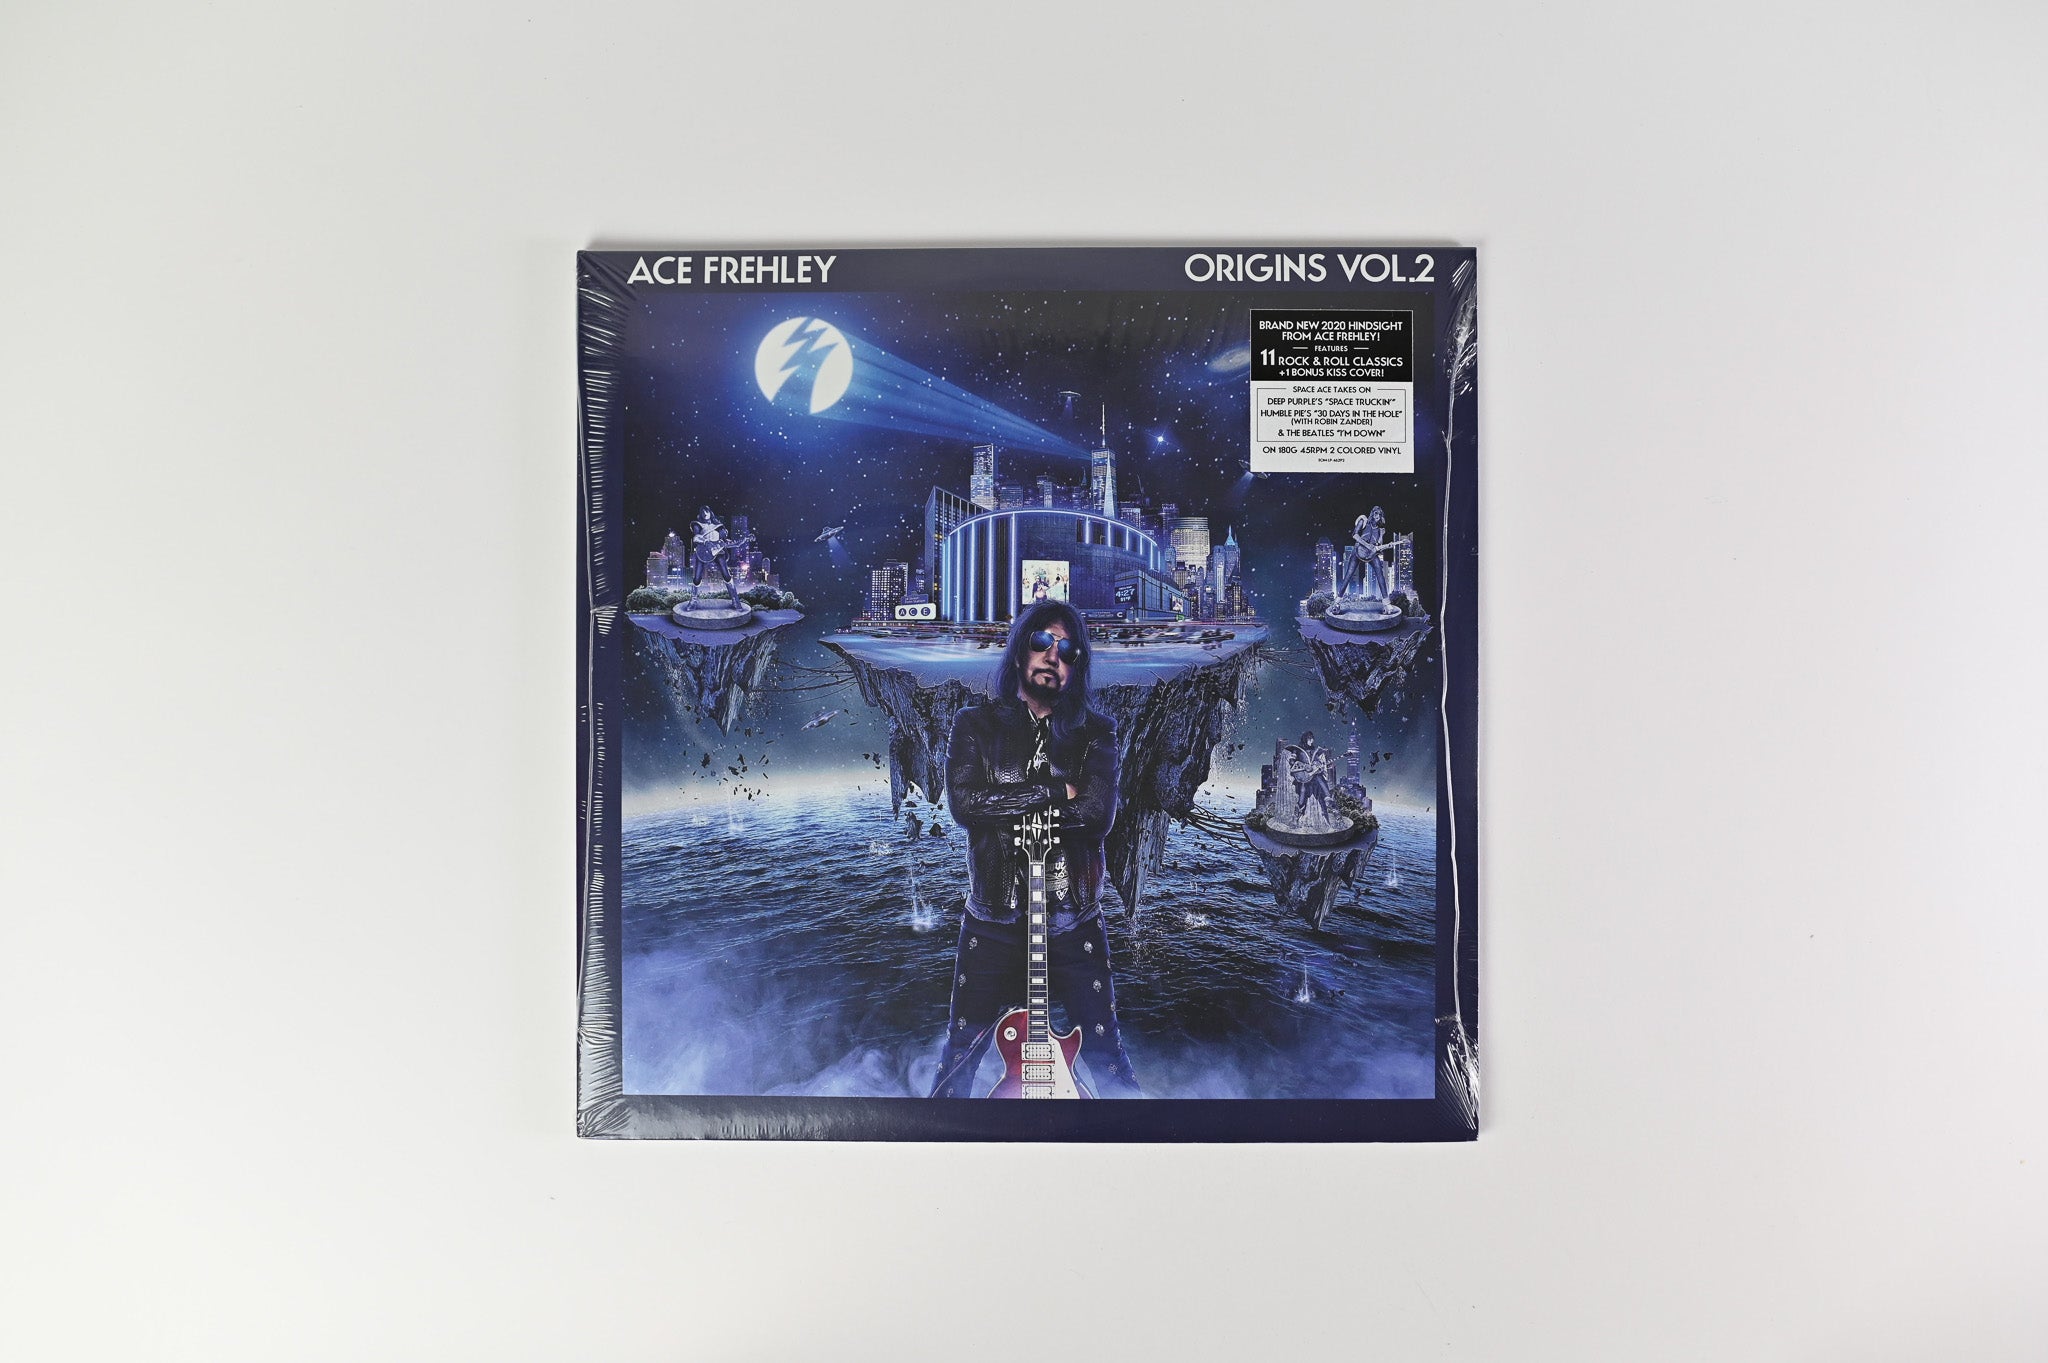 Ace Frehley - Origins Vol.2 on eOne Colored Vinyl Sealed